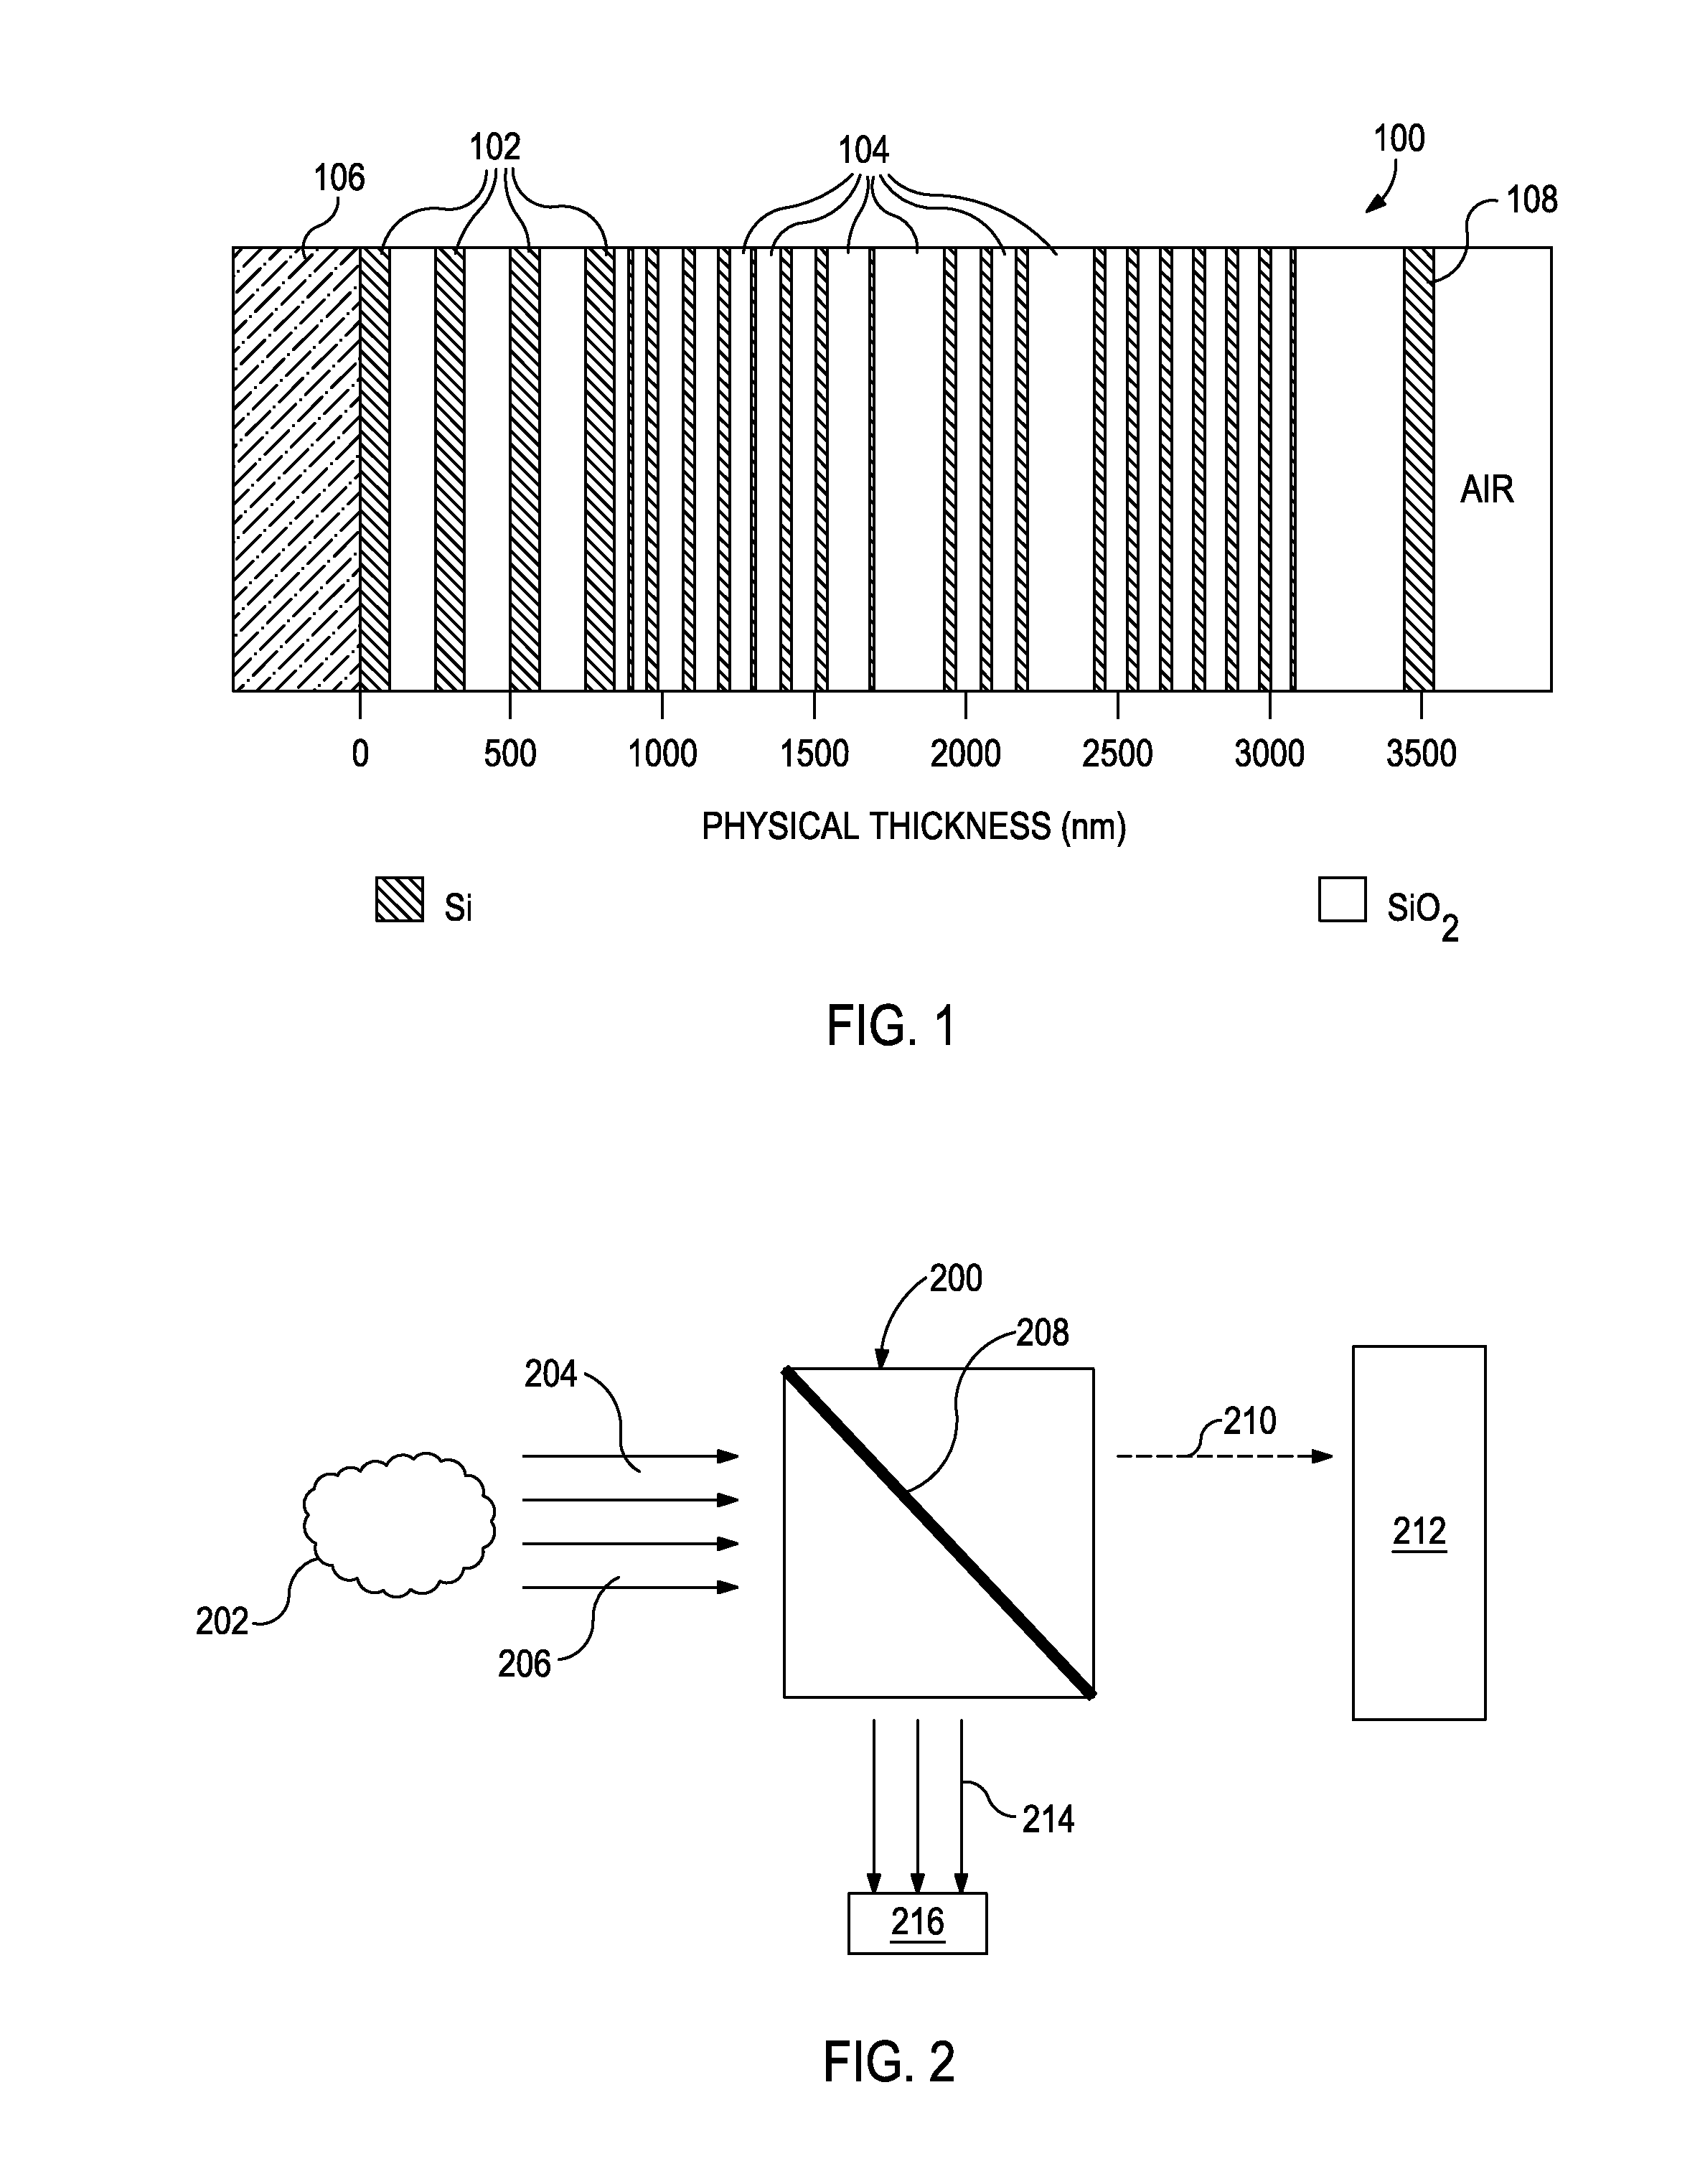 Systems and Methods for Inspecting and Monitoring a Pipeline